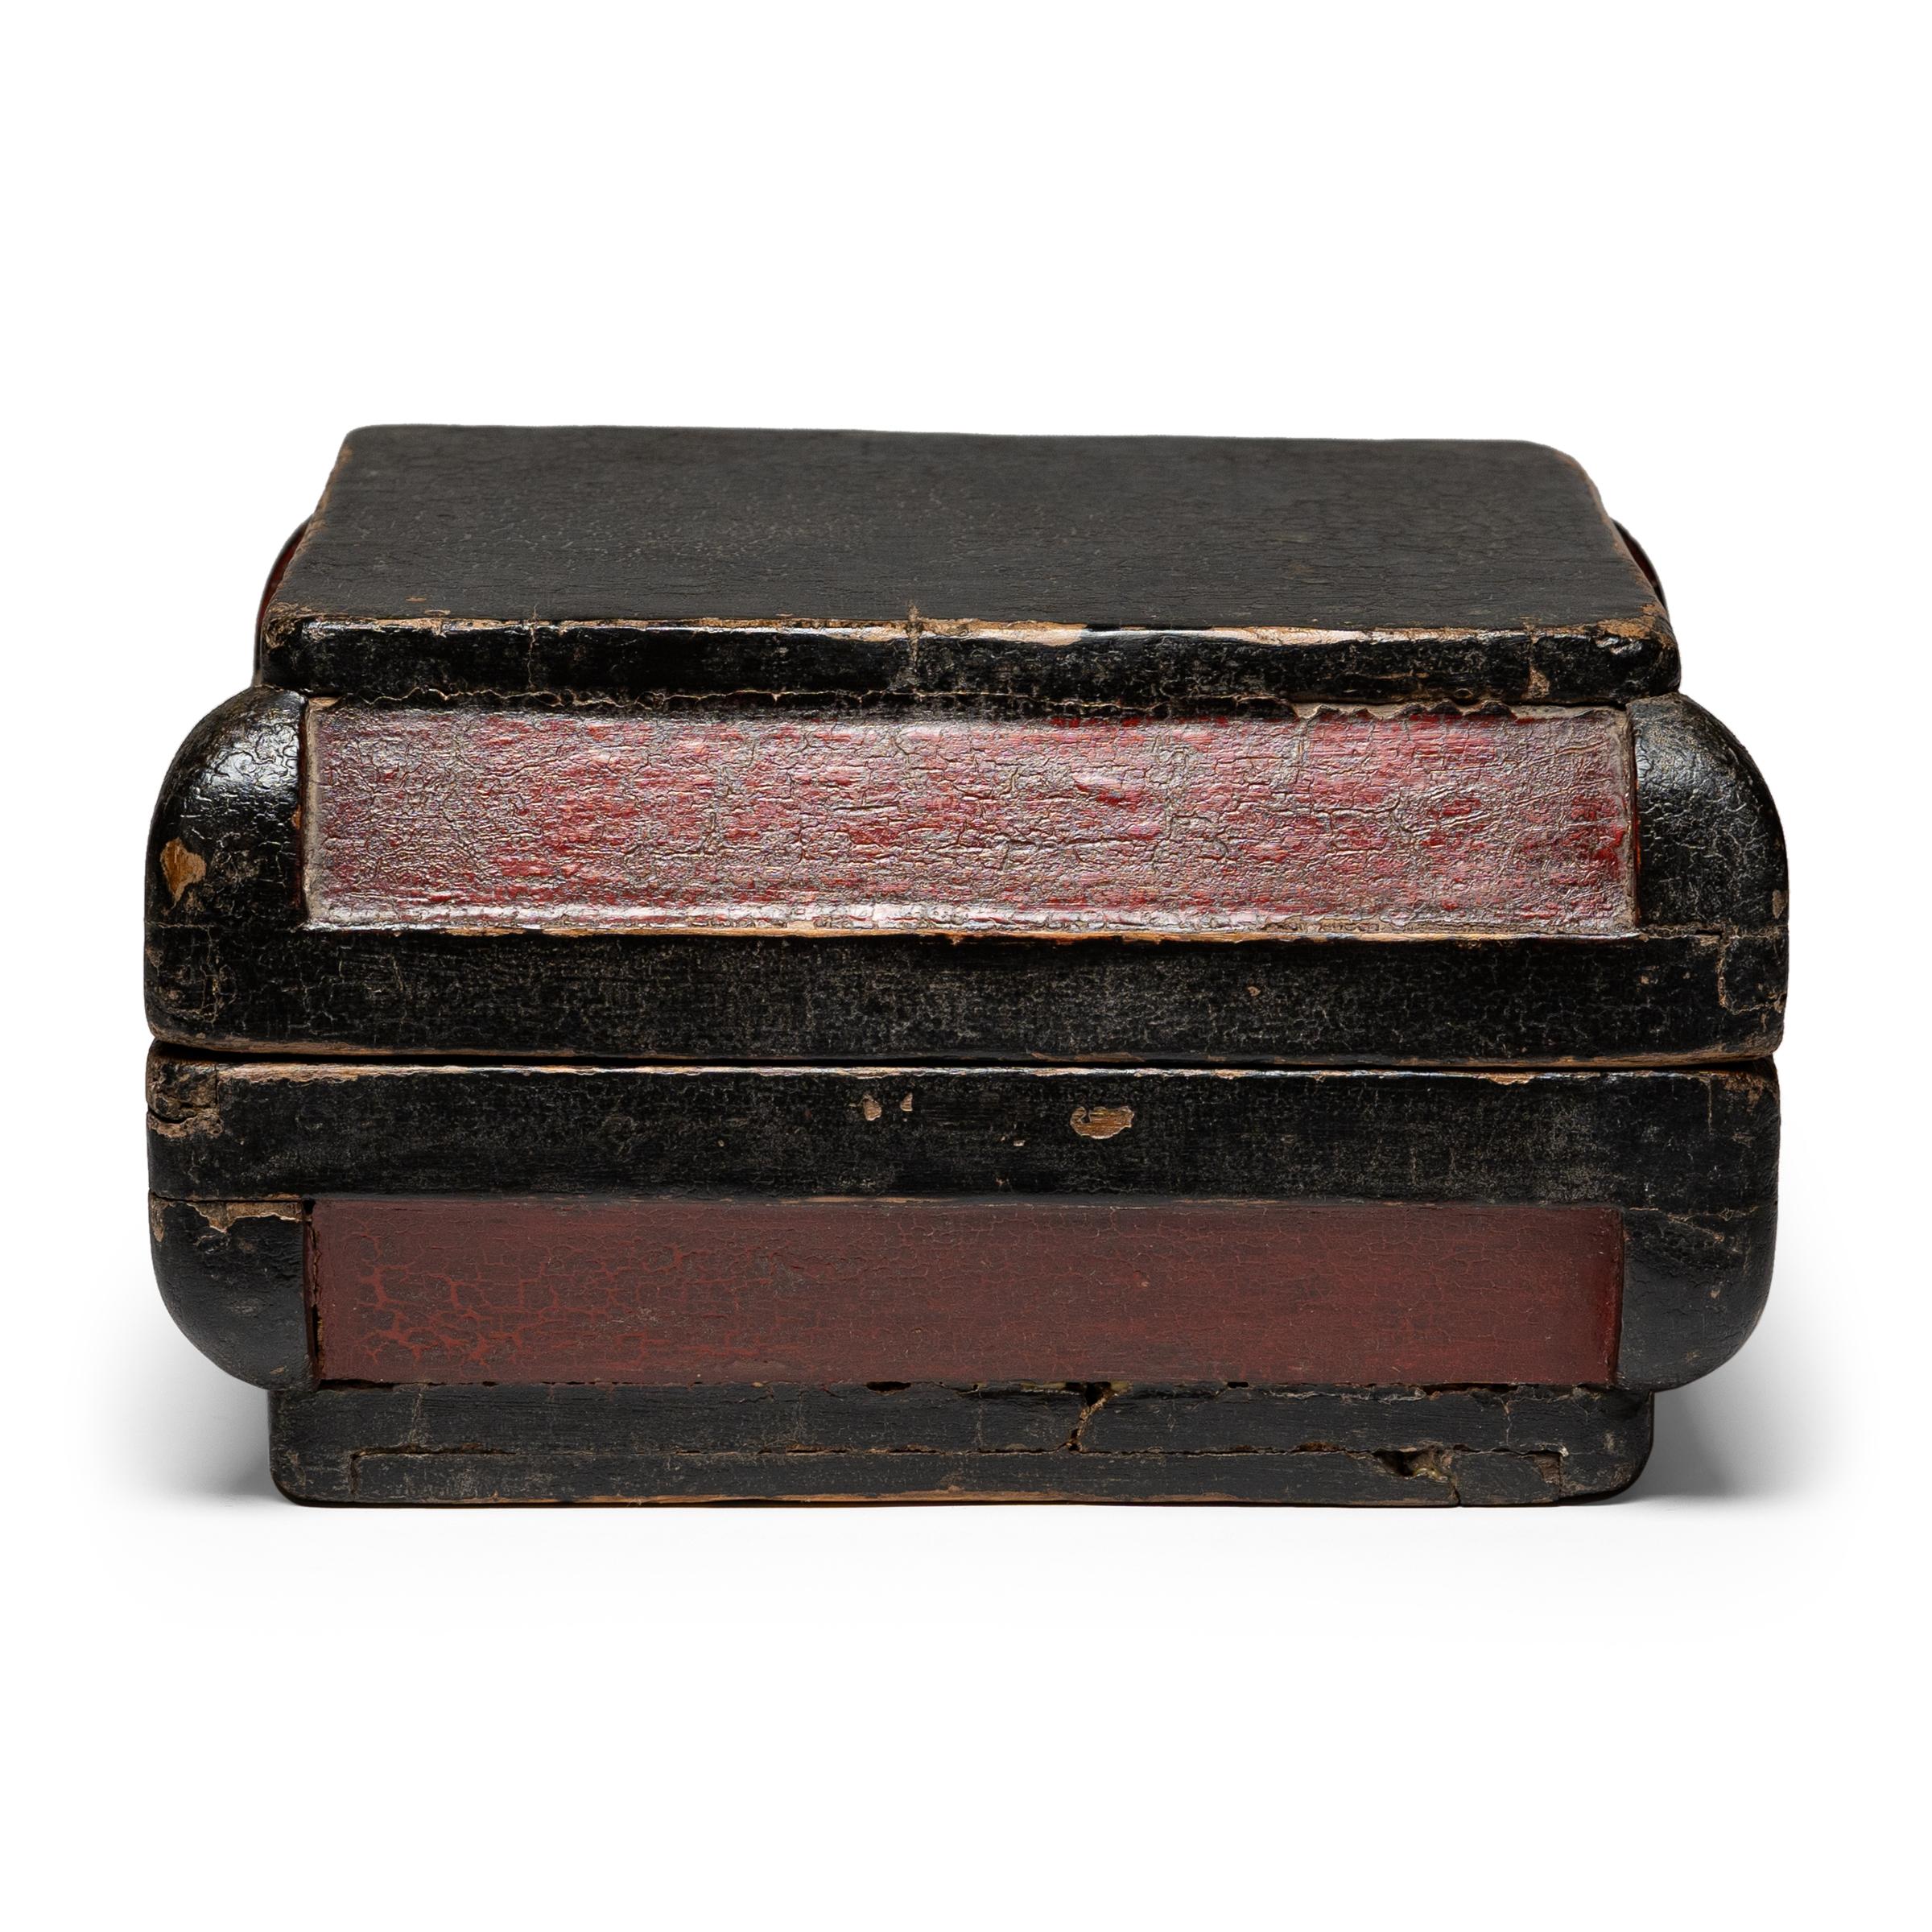 This simple lacquered container was once used as a 19th-century snack box, presented as a gift during holidays and special occasions. To the delight of the recipients, the unassuming box would have opened to reveal a bounty of popular snack foods,